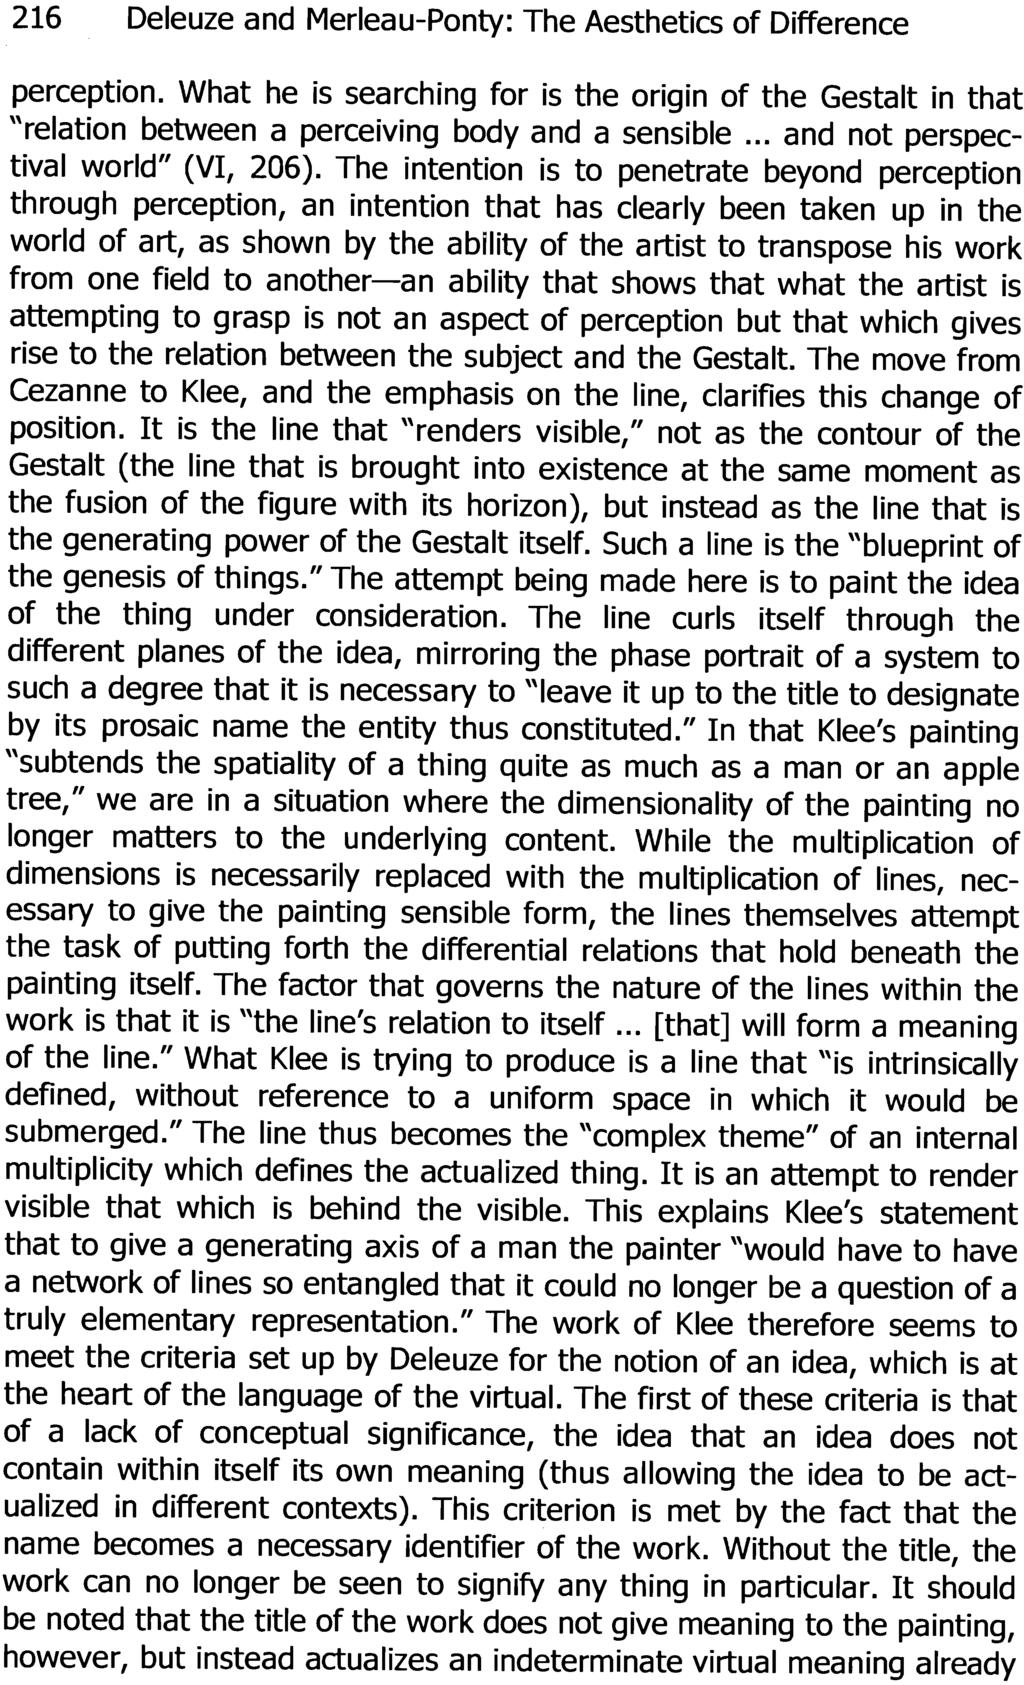 216 Deleuze and Merleau-Ponty: The Aesthetics of Difference perception. What he is searching for is the origin of the Gestalt in that "relation between a perceiving body and a sensible.